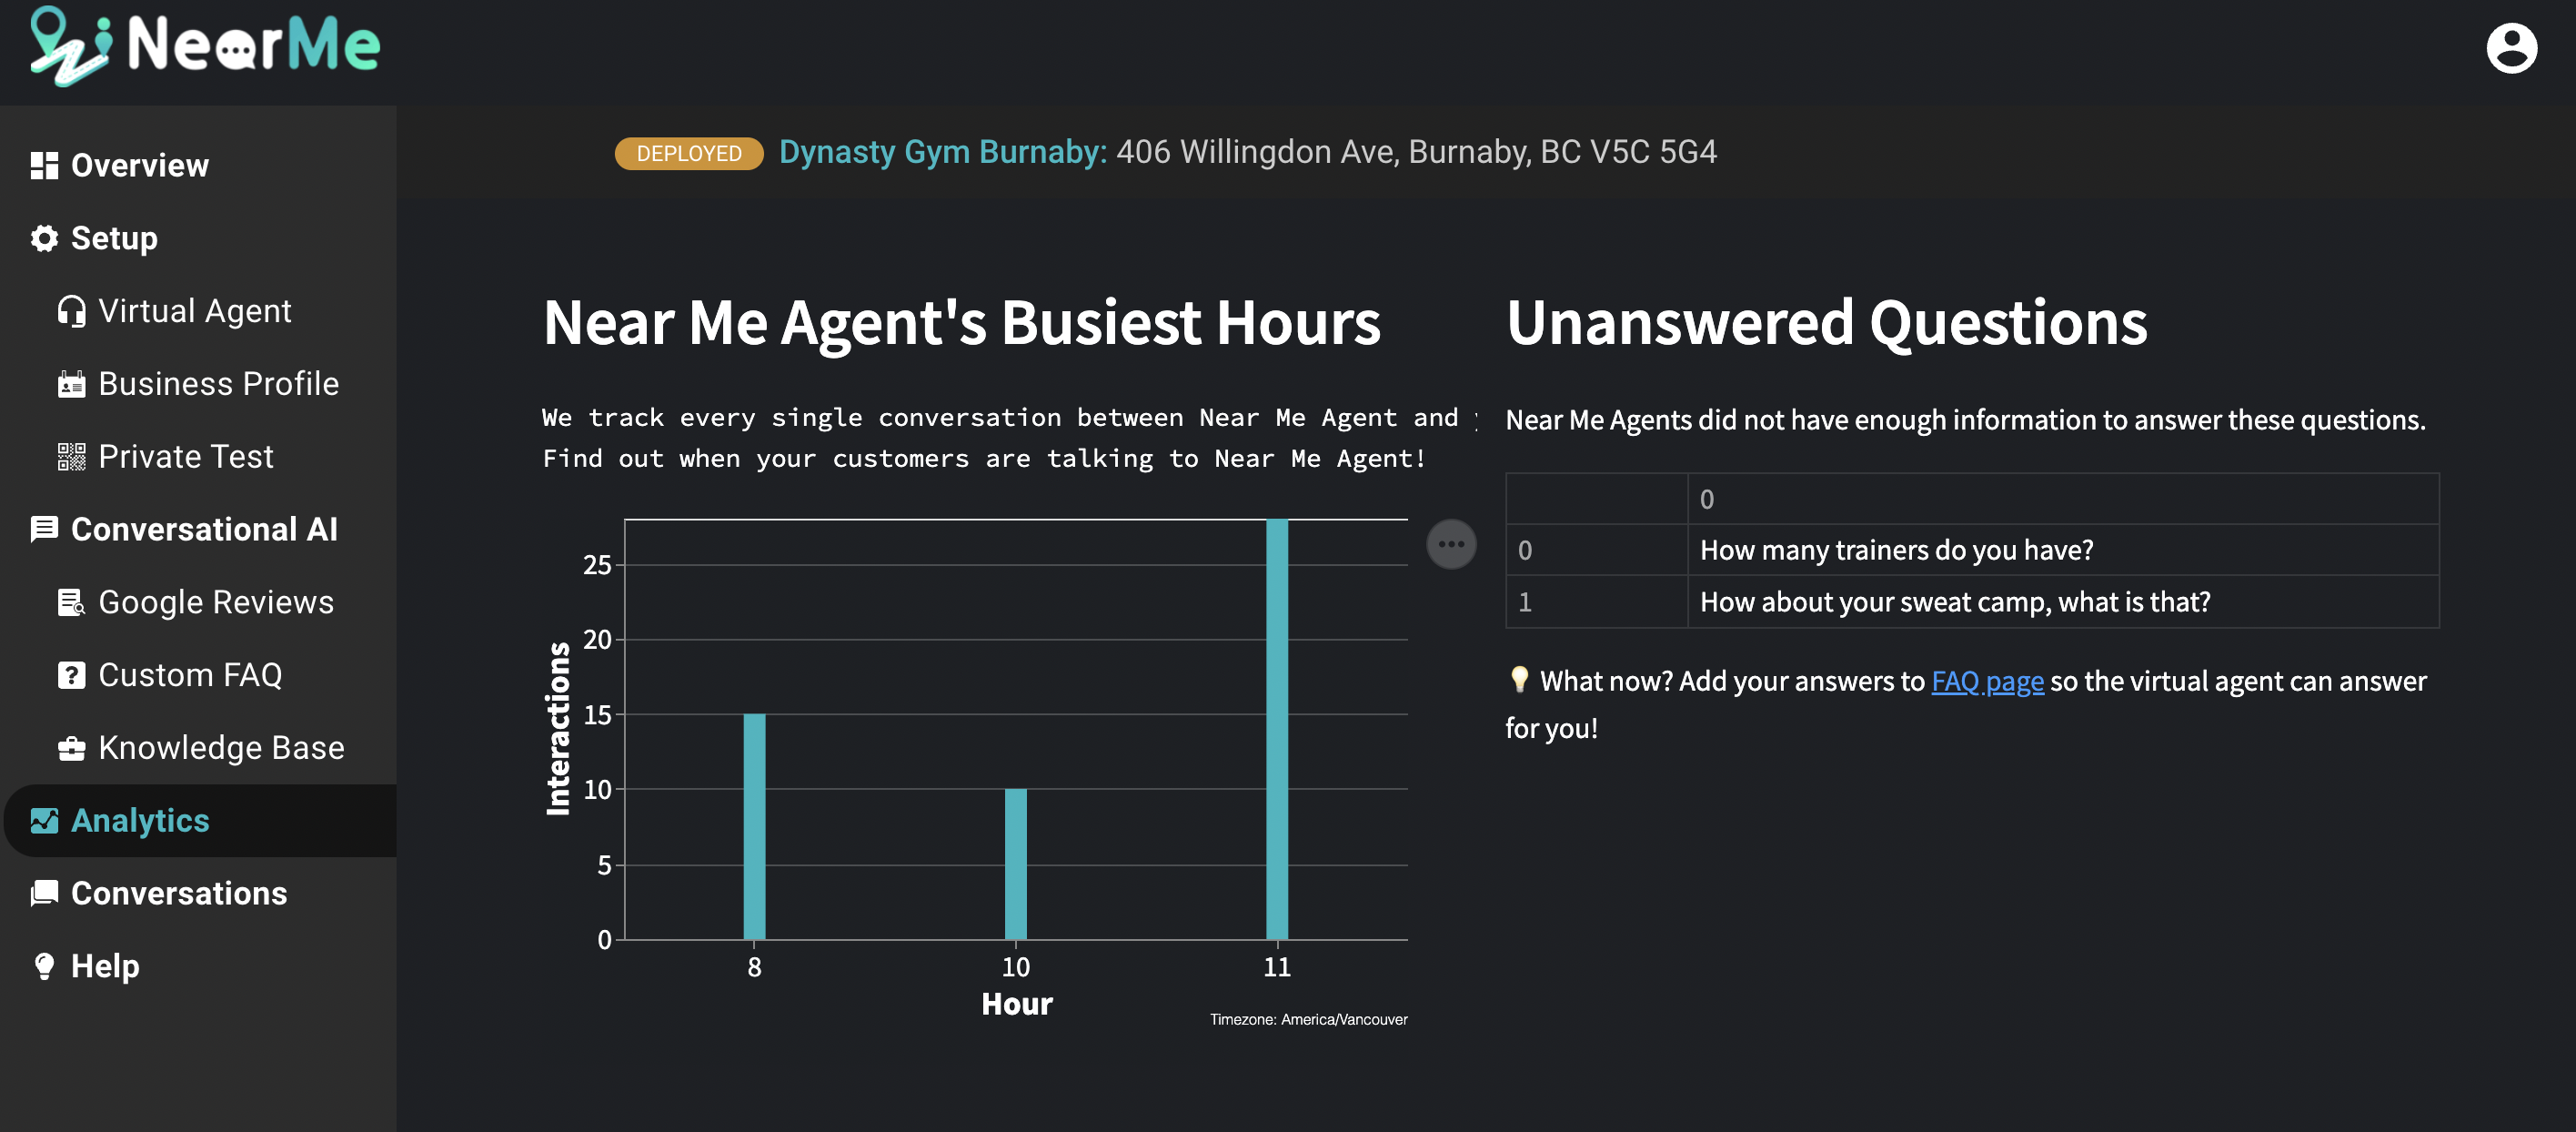 Near Me Analytics allows you to see your virtual agent’s busiest hours and unanswered questions